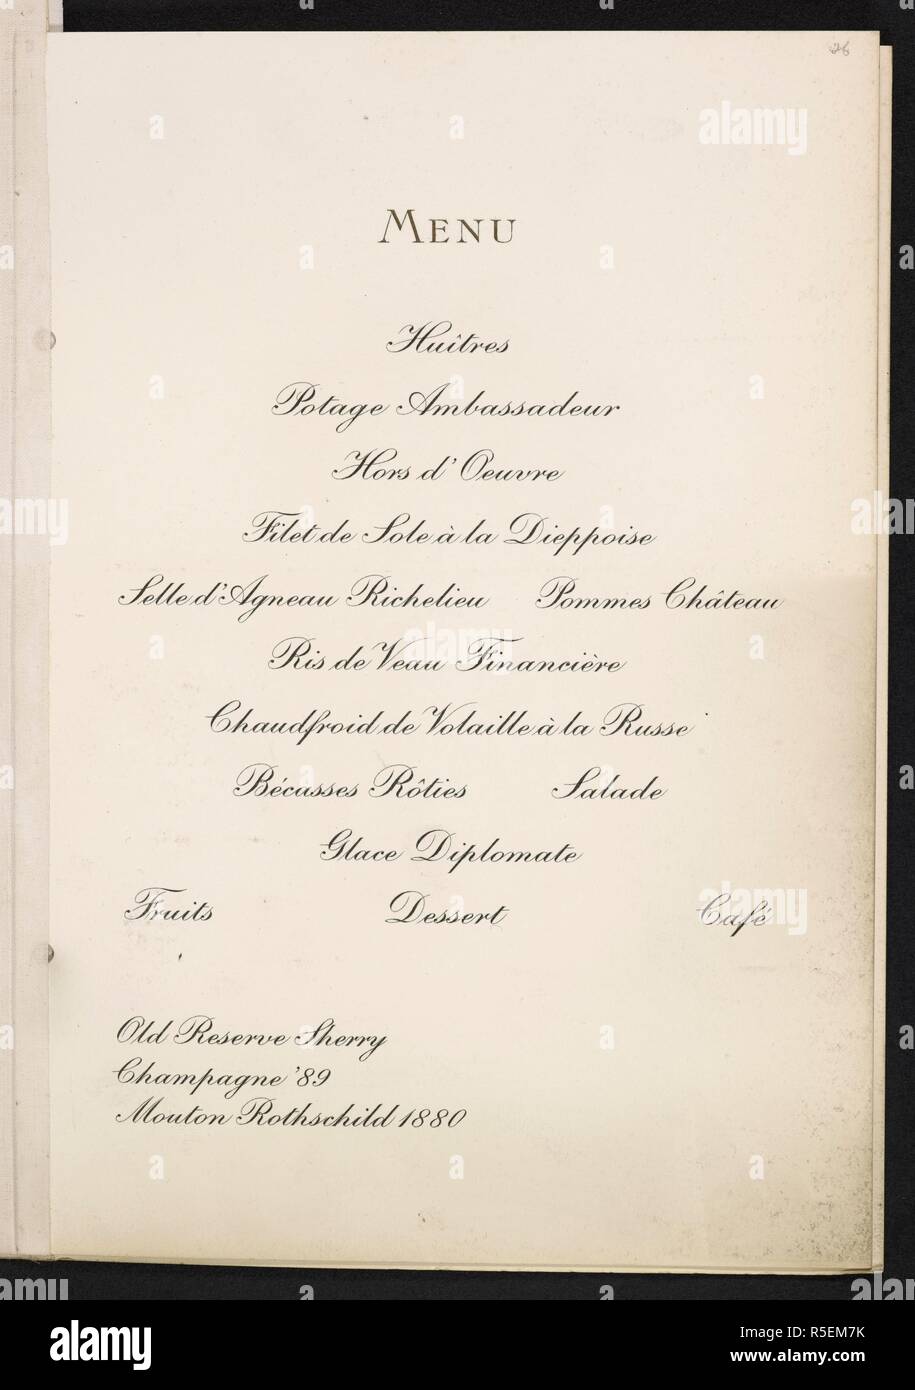 A menu for a dinner (for) to his excellency Jules Gambon, Ambassador of France to the United States by Mr Chauncey M. Depew and Mr. James H. Hyde. Sherry's. November 15th, 1902. . [A collection of menu cards of dinners and reports of celebrations in the United States of America in the years 1890-1904, formed by Miss F. E. Buttolph. Bound in three volumes.]. [1890-1904.]. See also file N10002-81. Source: C.120.f.2 volume 4 no.26. Language: English. Stock Photo